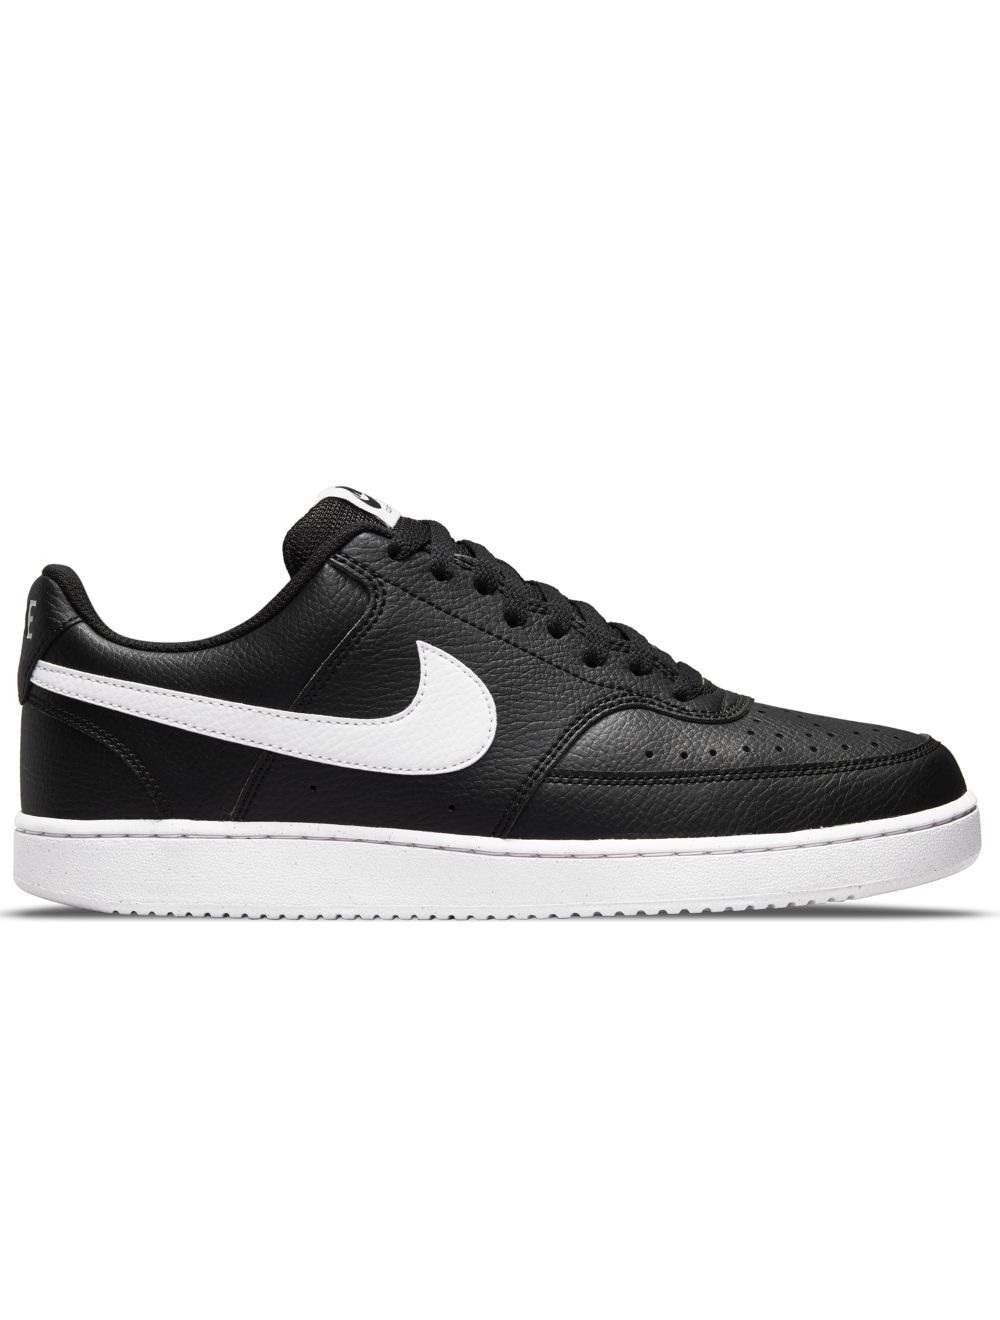 Competidores Pase para saber Polo DEPORTIVO NIKE COURT VISION LOW MENS SHOE AA 20% MATERIALES RECICLADOS